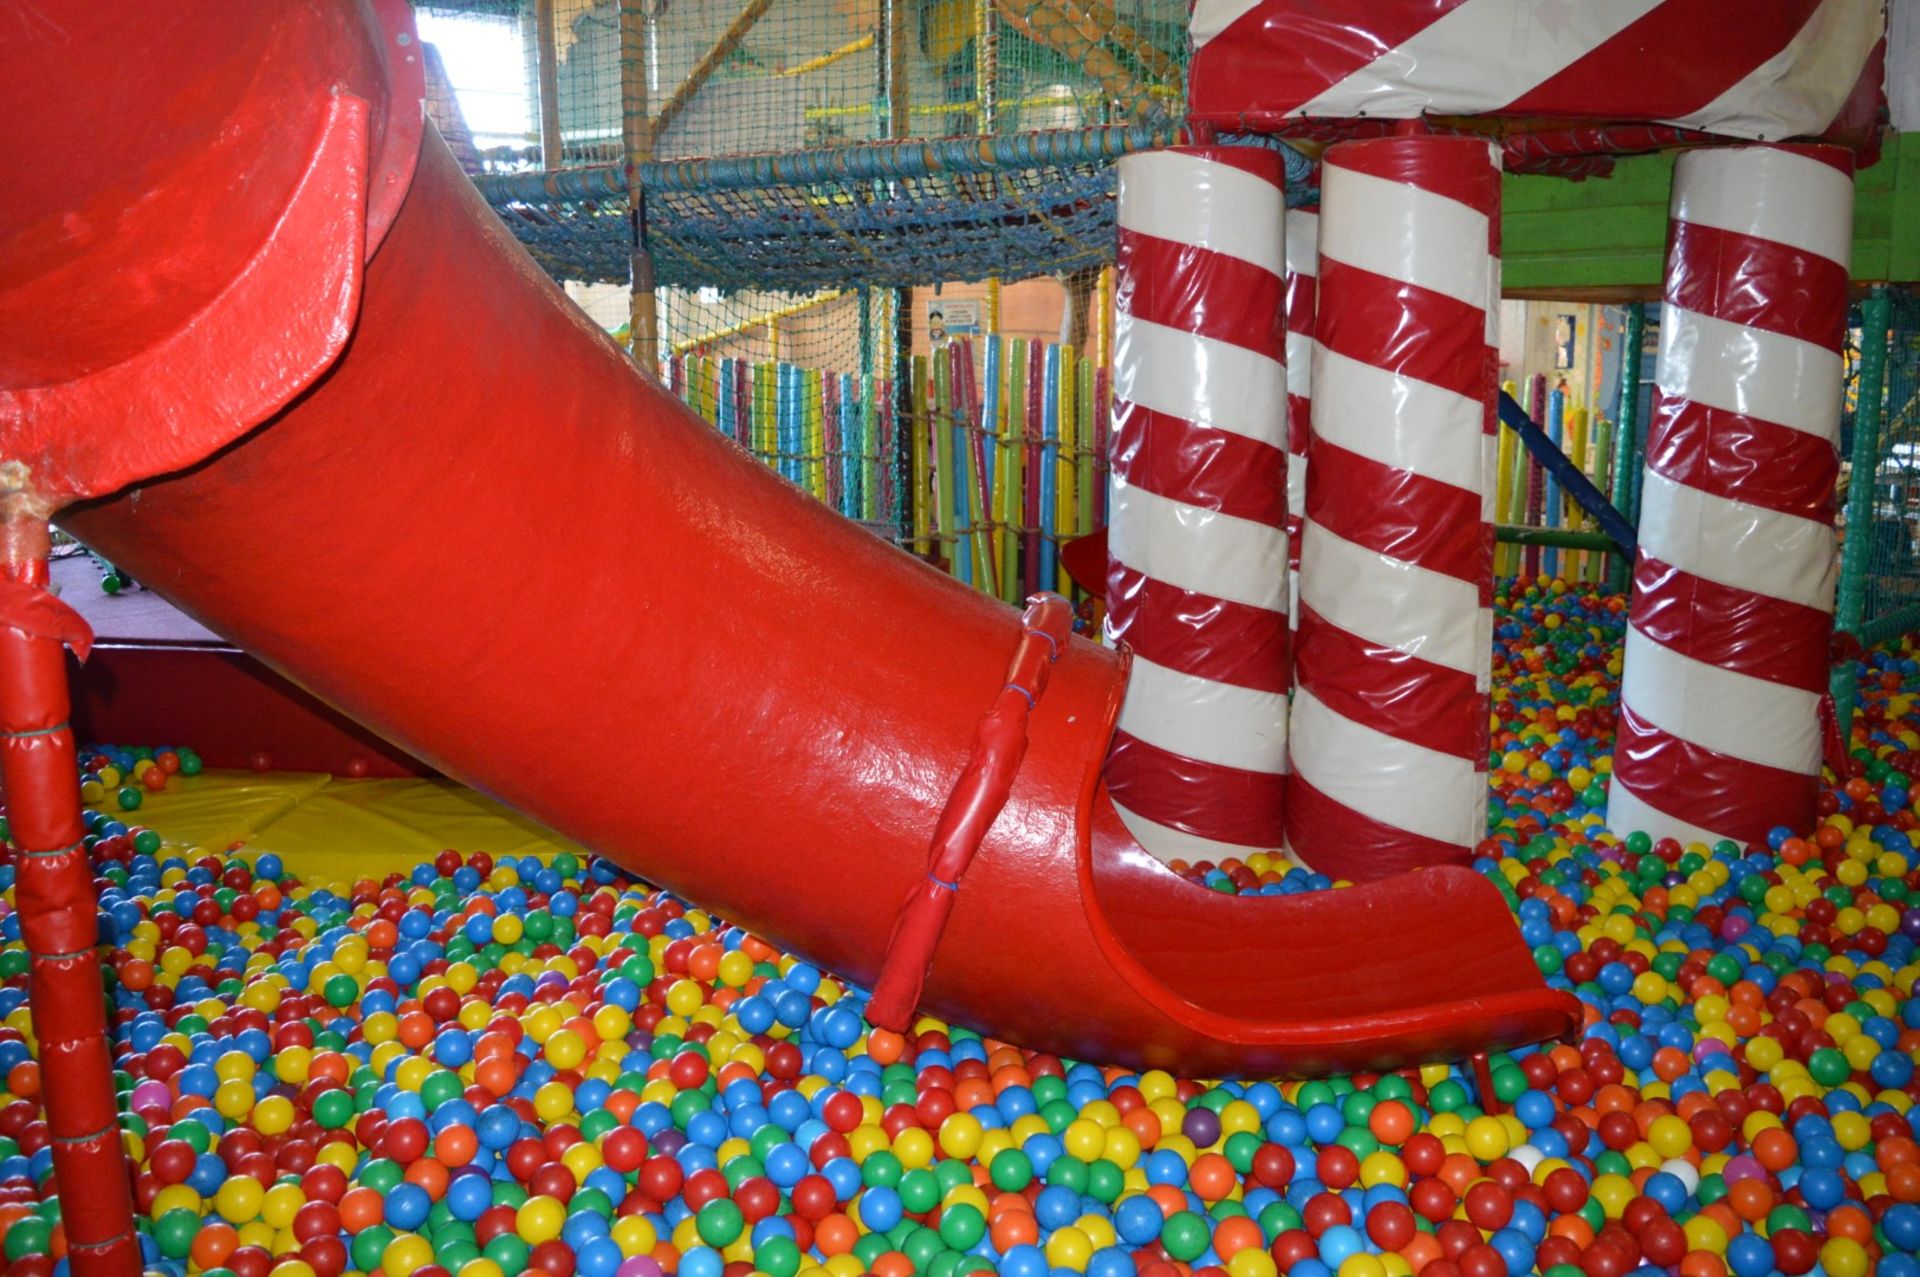 1 x Huge Amount of Childrens Play Balls From Childrens Playcentre in Good Condition - Ref PTP - - Image 5 of 7